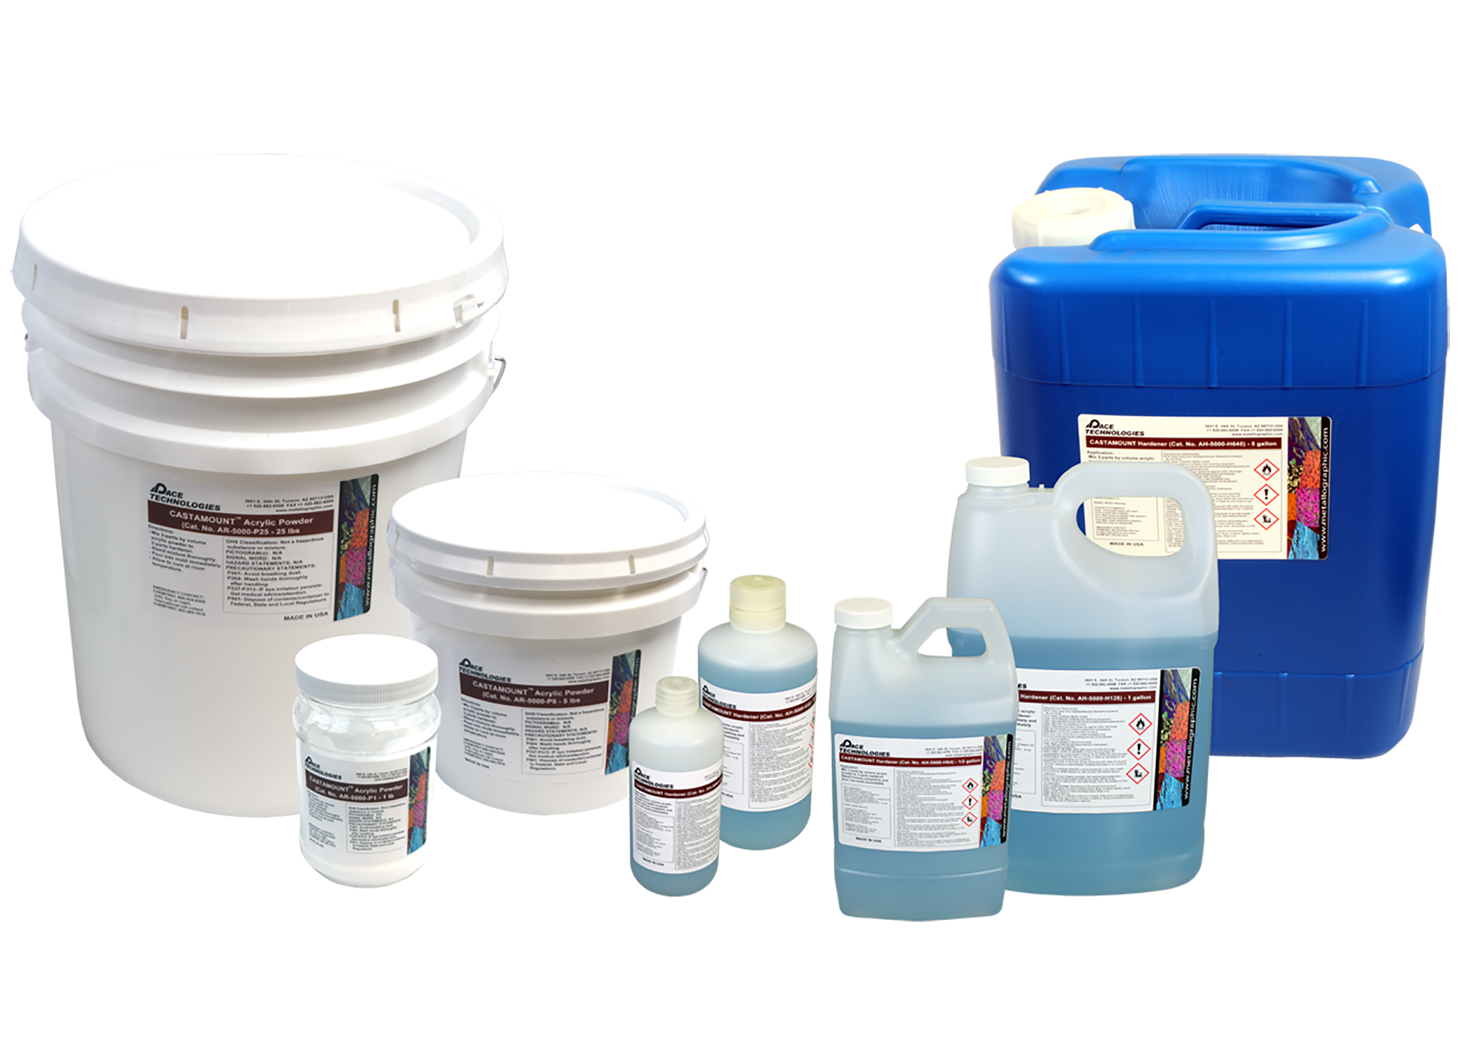 EpoKwick™ FC Fast Cure Epoxy Mounting Compound for Top Quality Sample  Preparation in Materialography Labmate Online